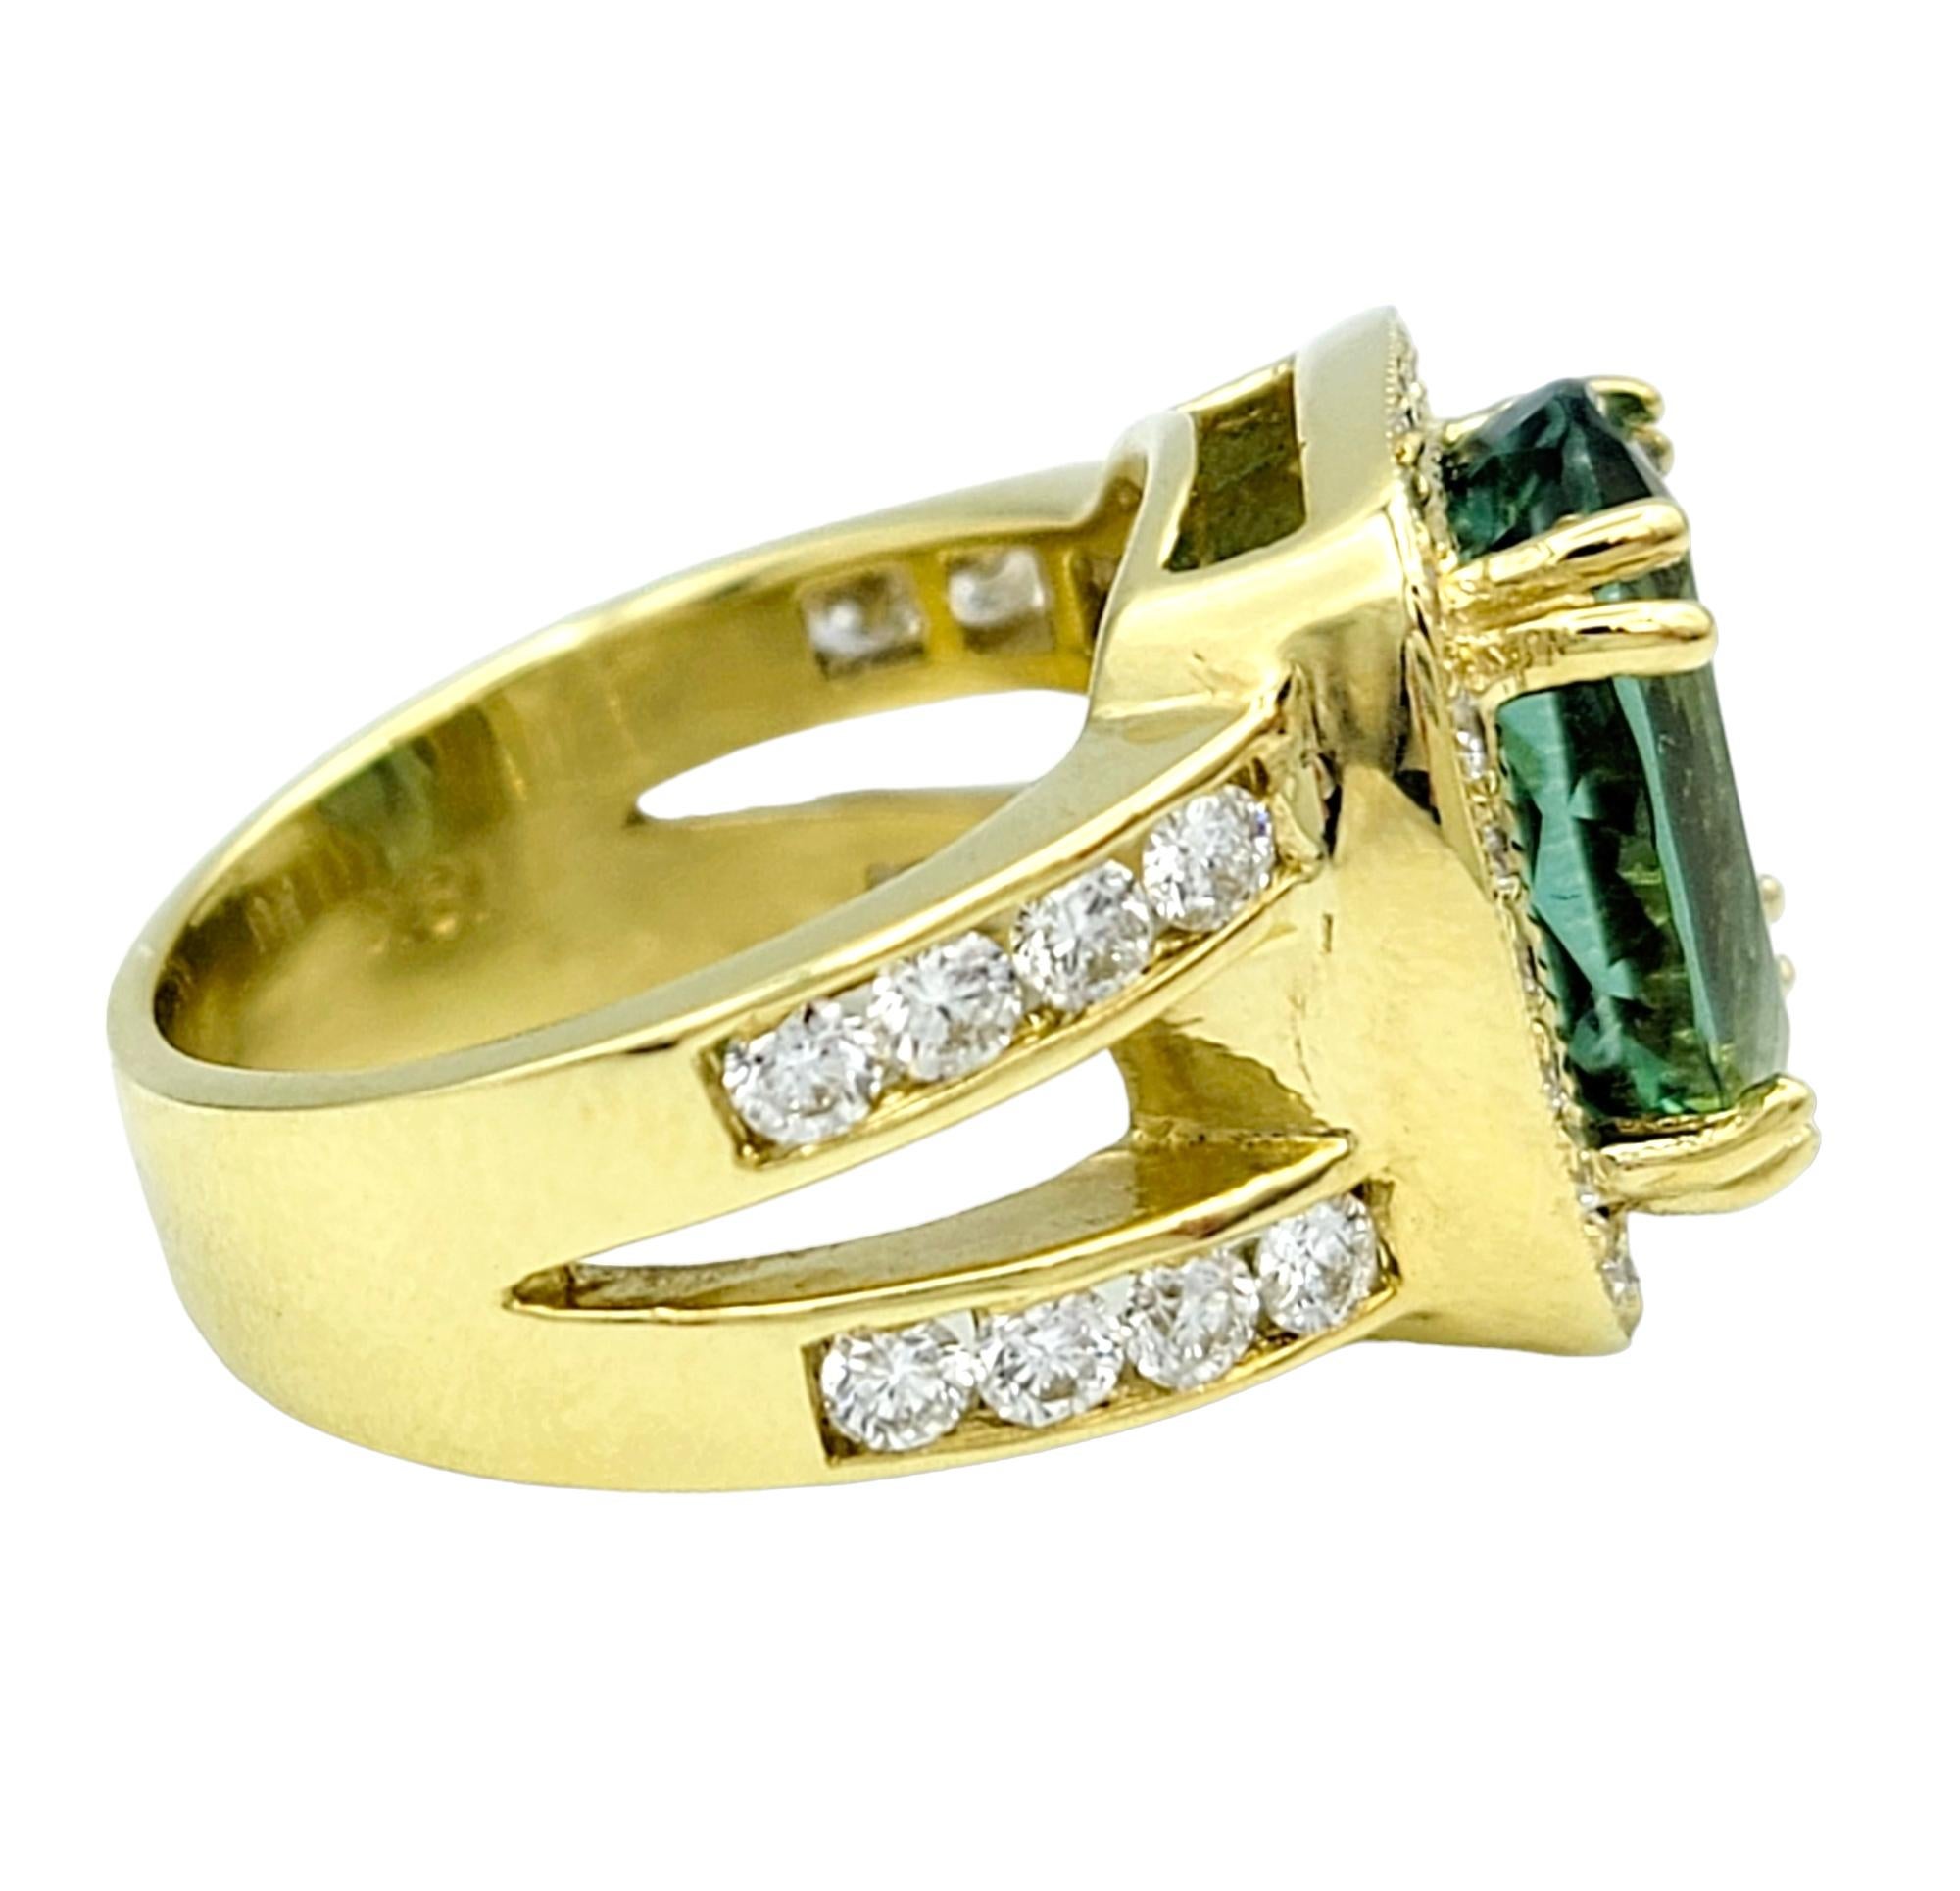 Green Tourmaline and Diamond Halo Split Shank Cocktail Ring 18 Karat Yellow Gold In Good Condition For Sale In Scottsdale, AZ